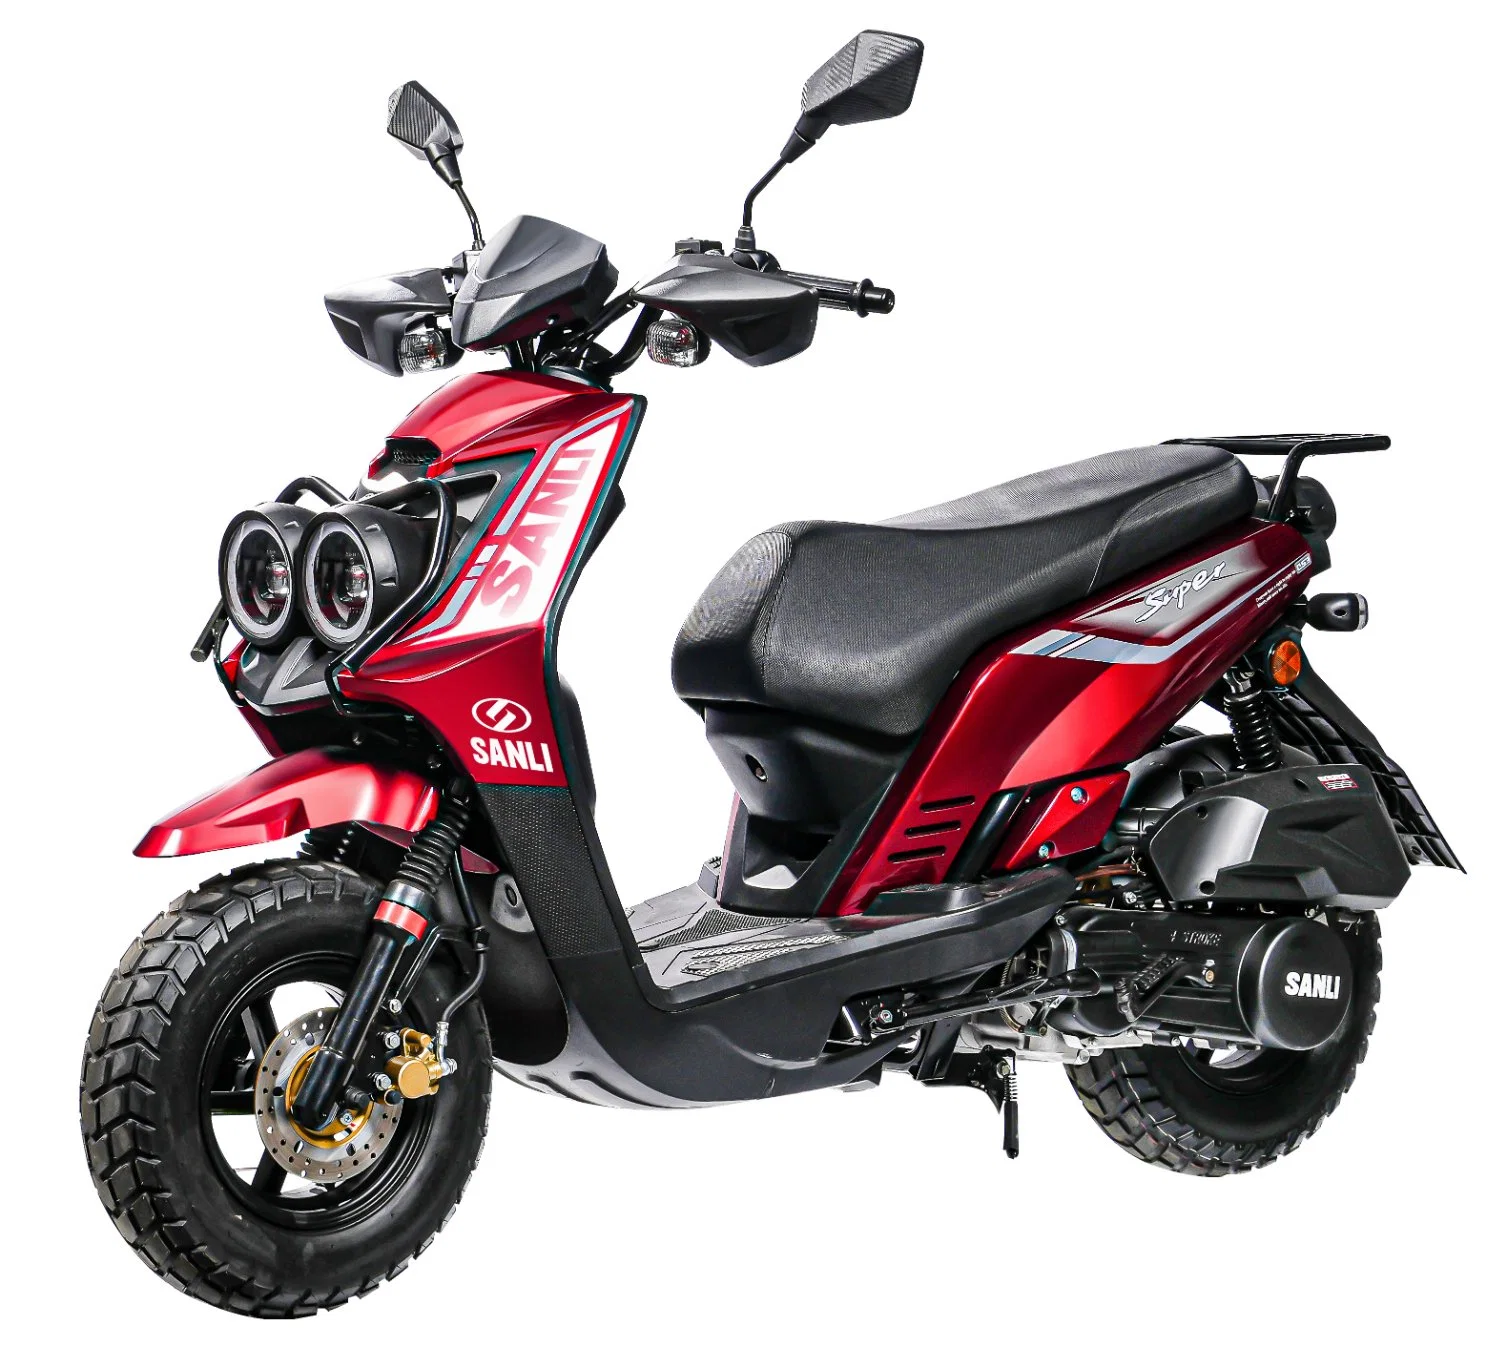 Sanli Gasoline Scooter 150cc Motorcycle Dirt Bike Strong Bicycle